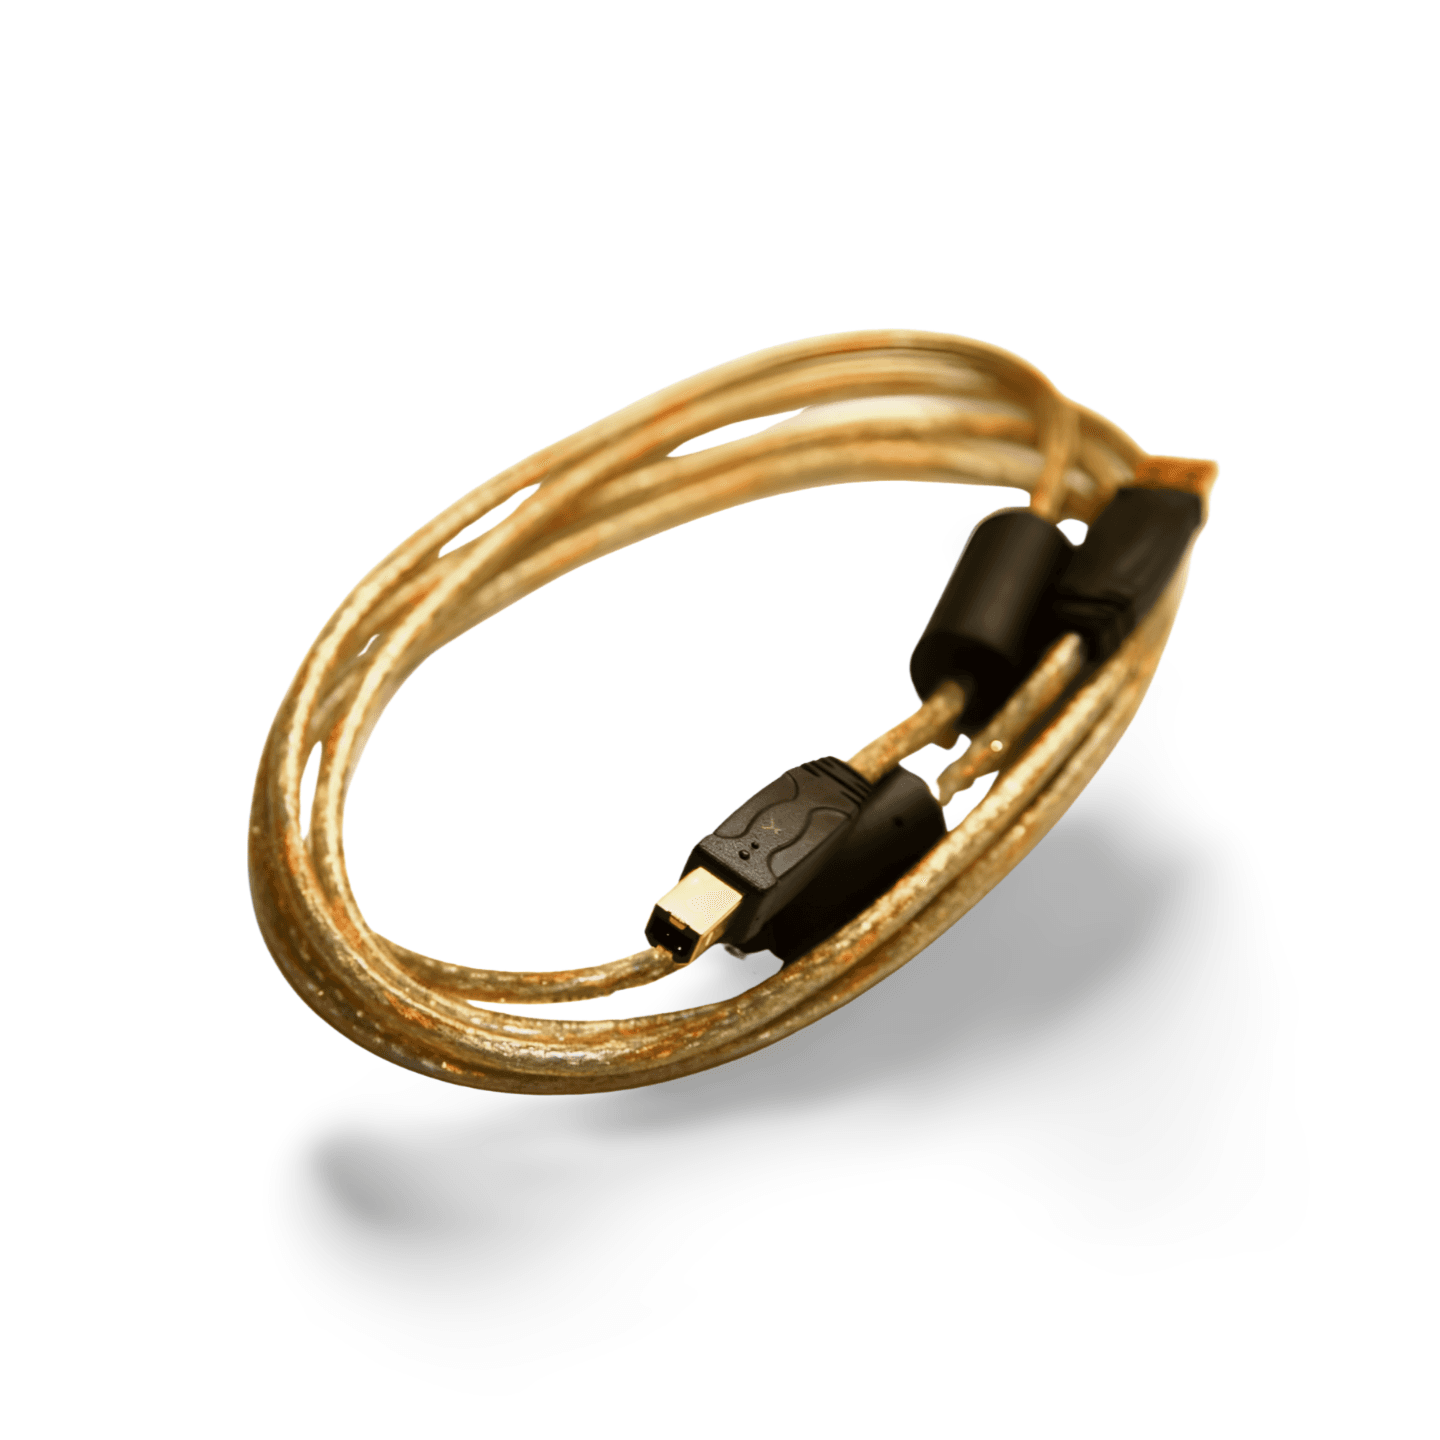 6ft USB 2.0 Cable Type A to Type B GoldX GX620 gold